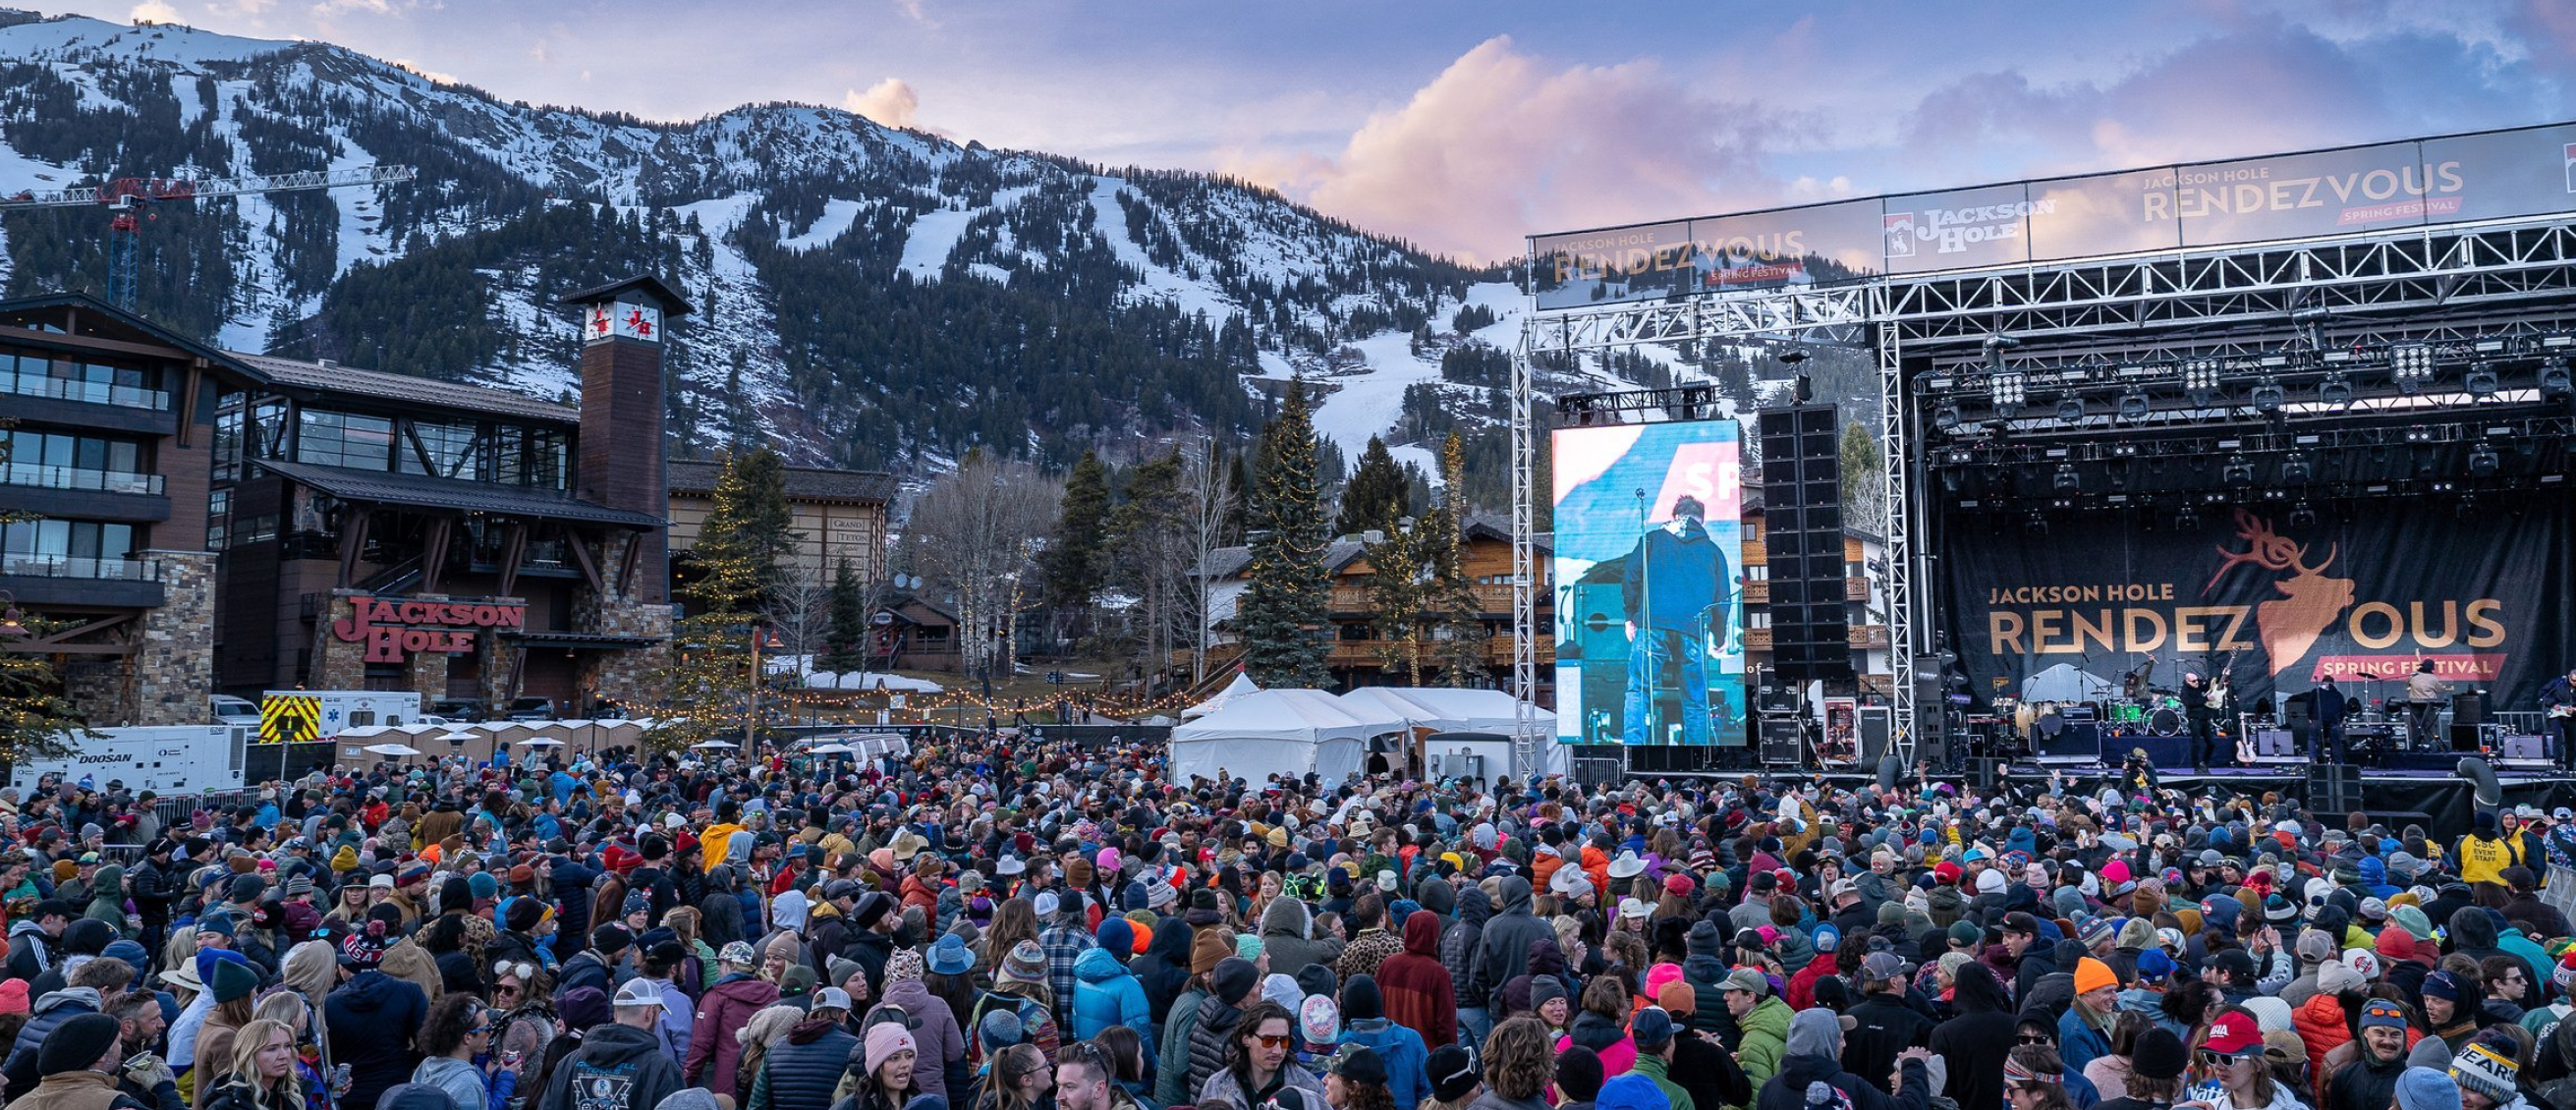 A crowd at the Rendezvous Music Festival in Jackson Hole.